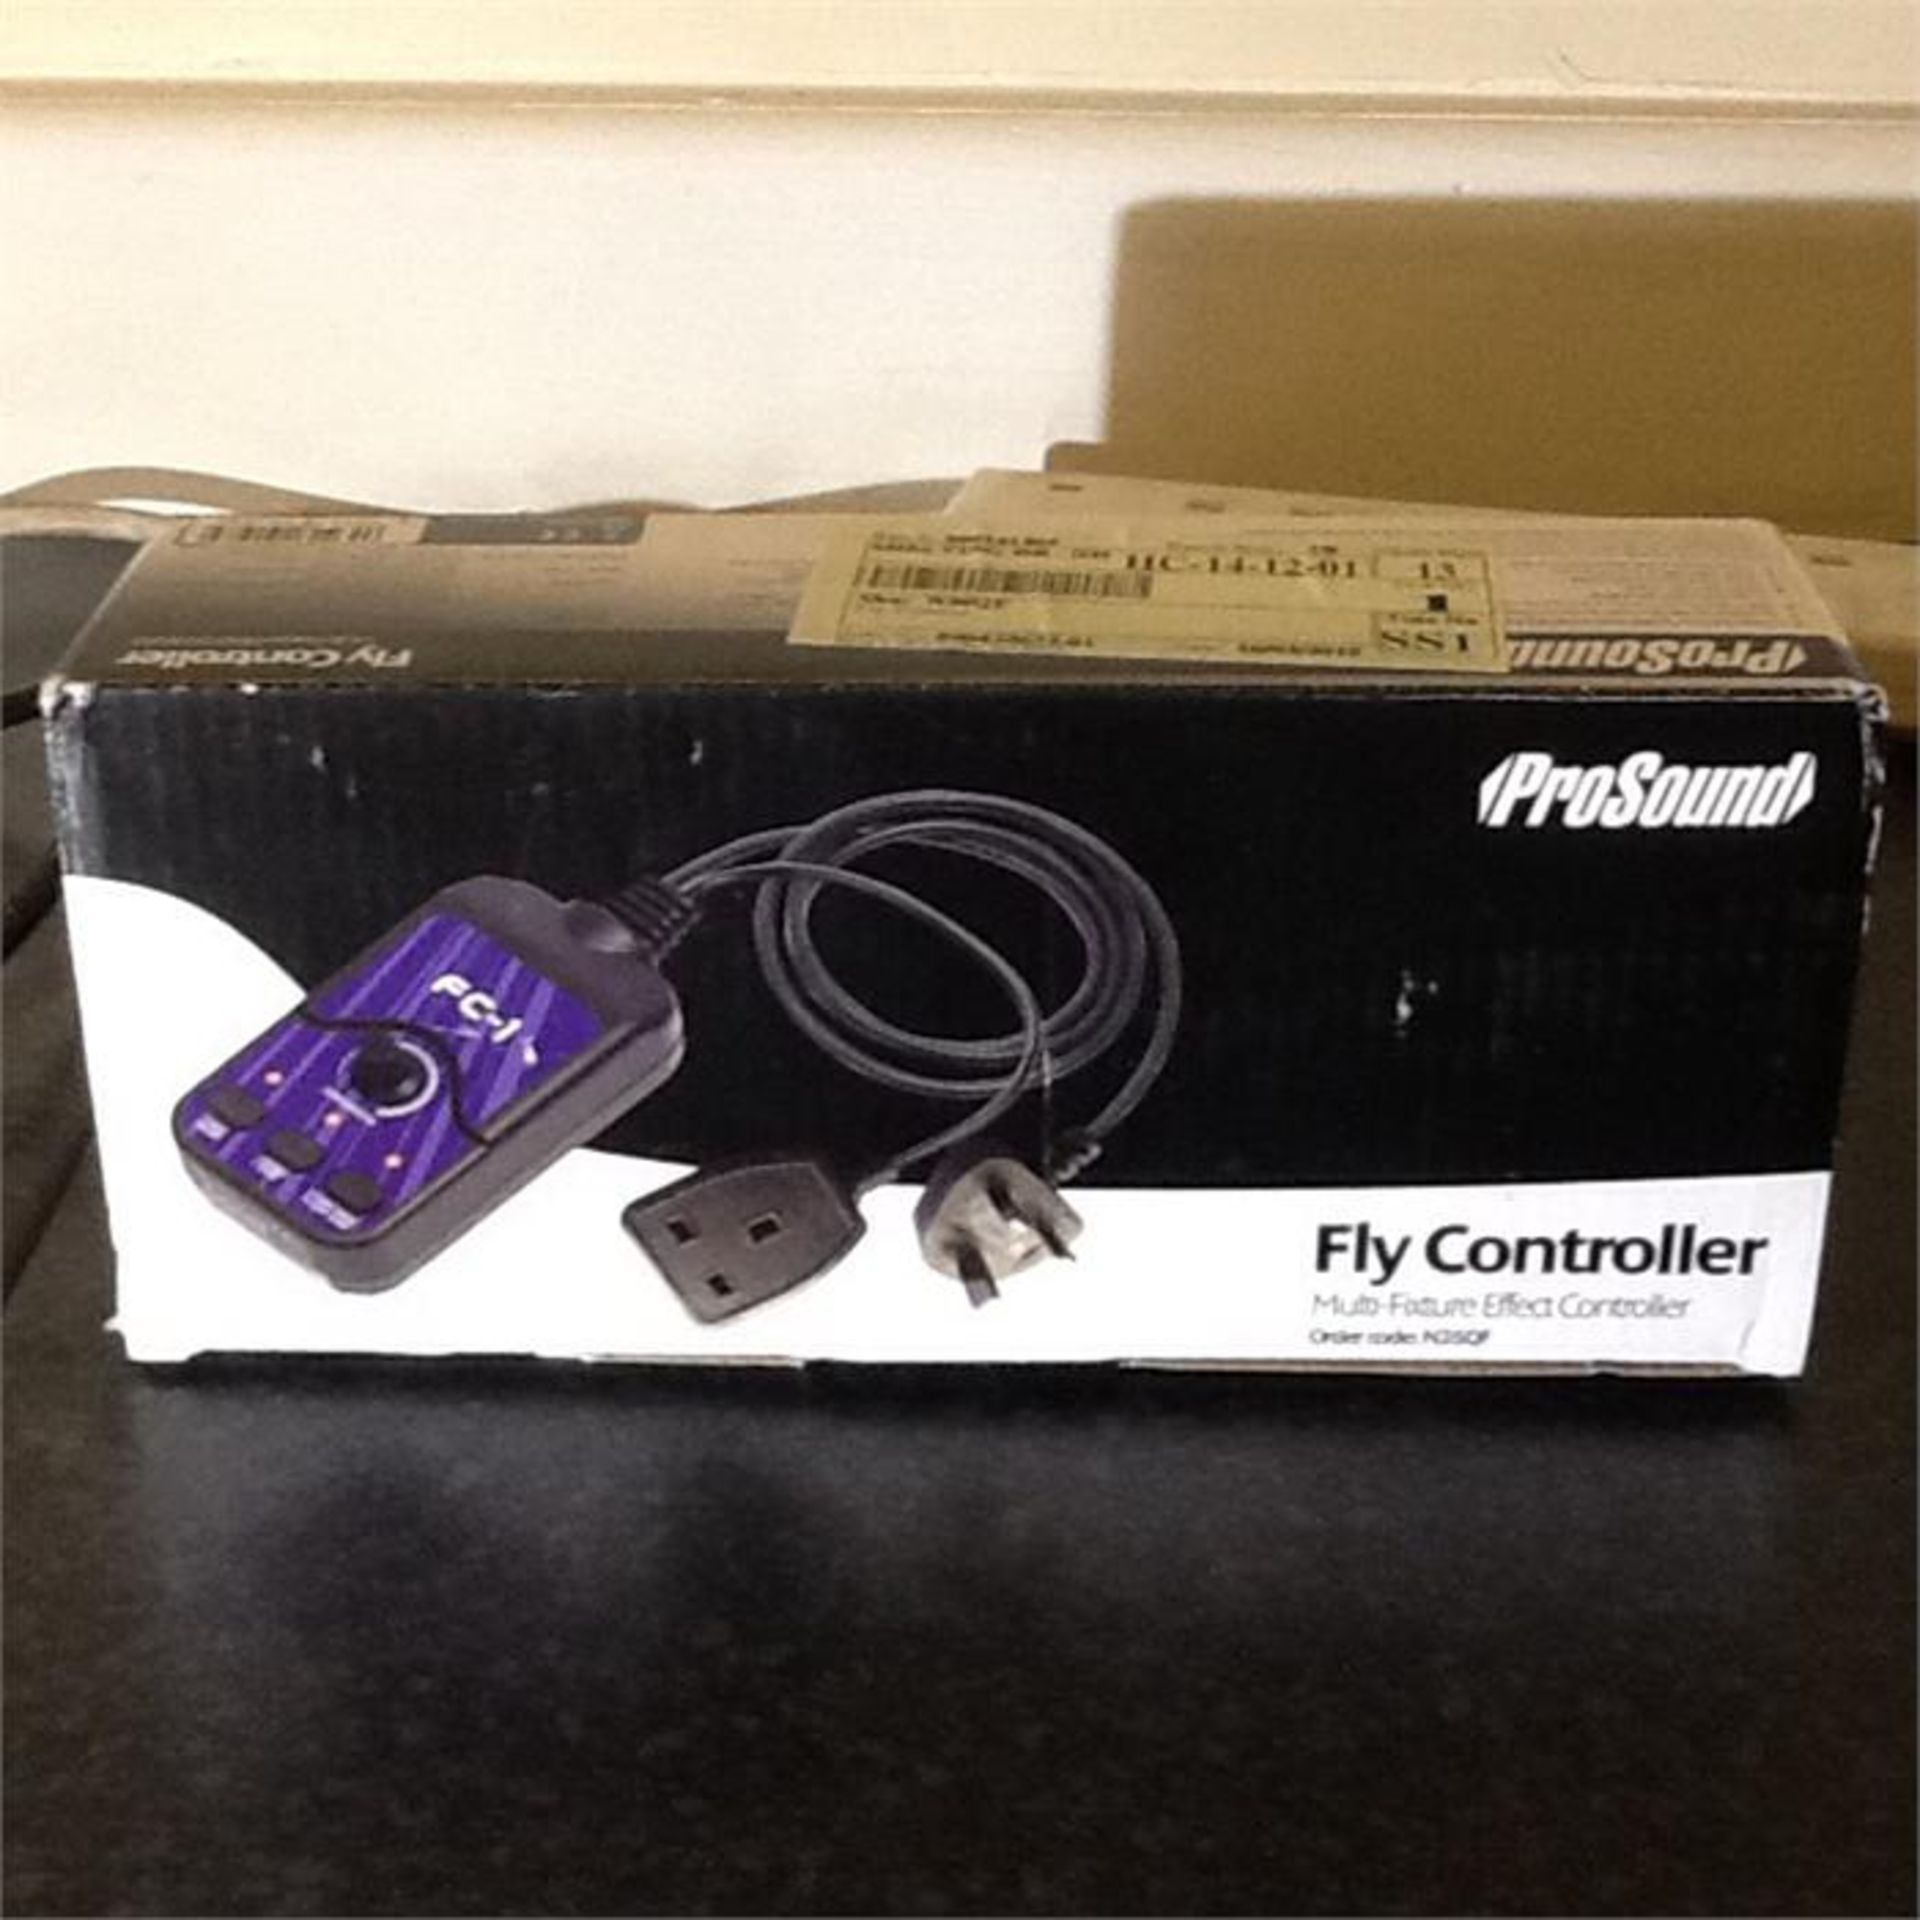 Prosound fly controller. Boxed - Image 4 of 5